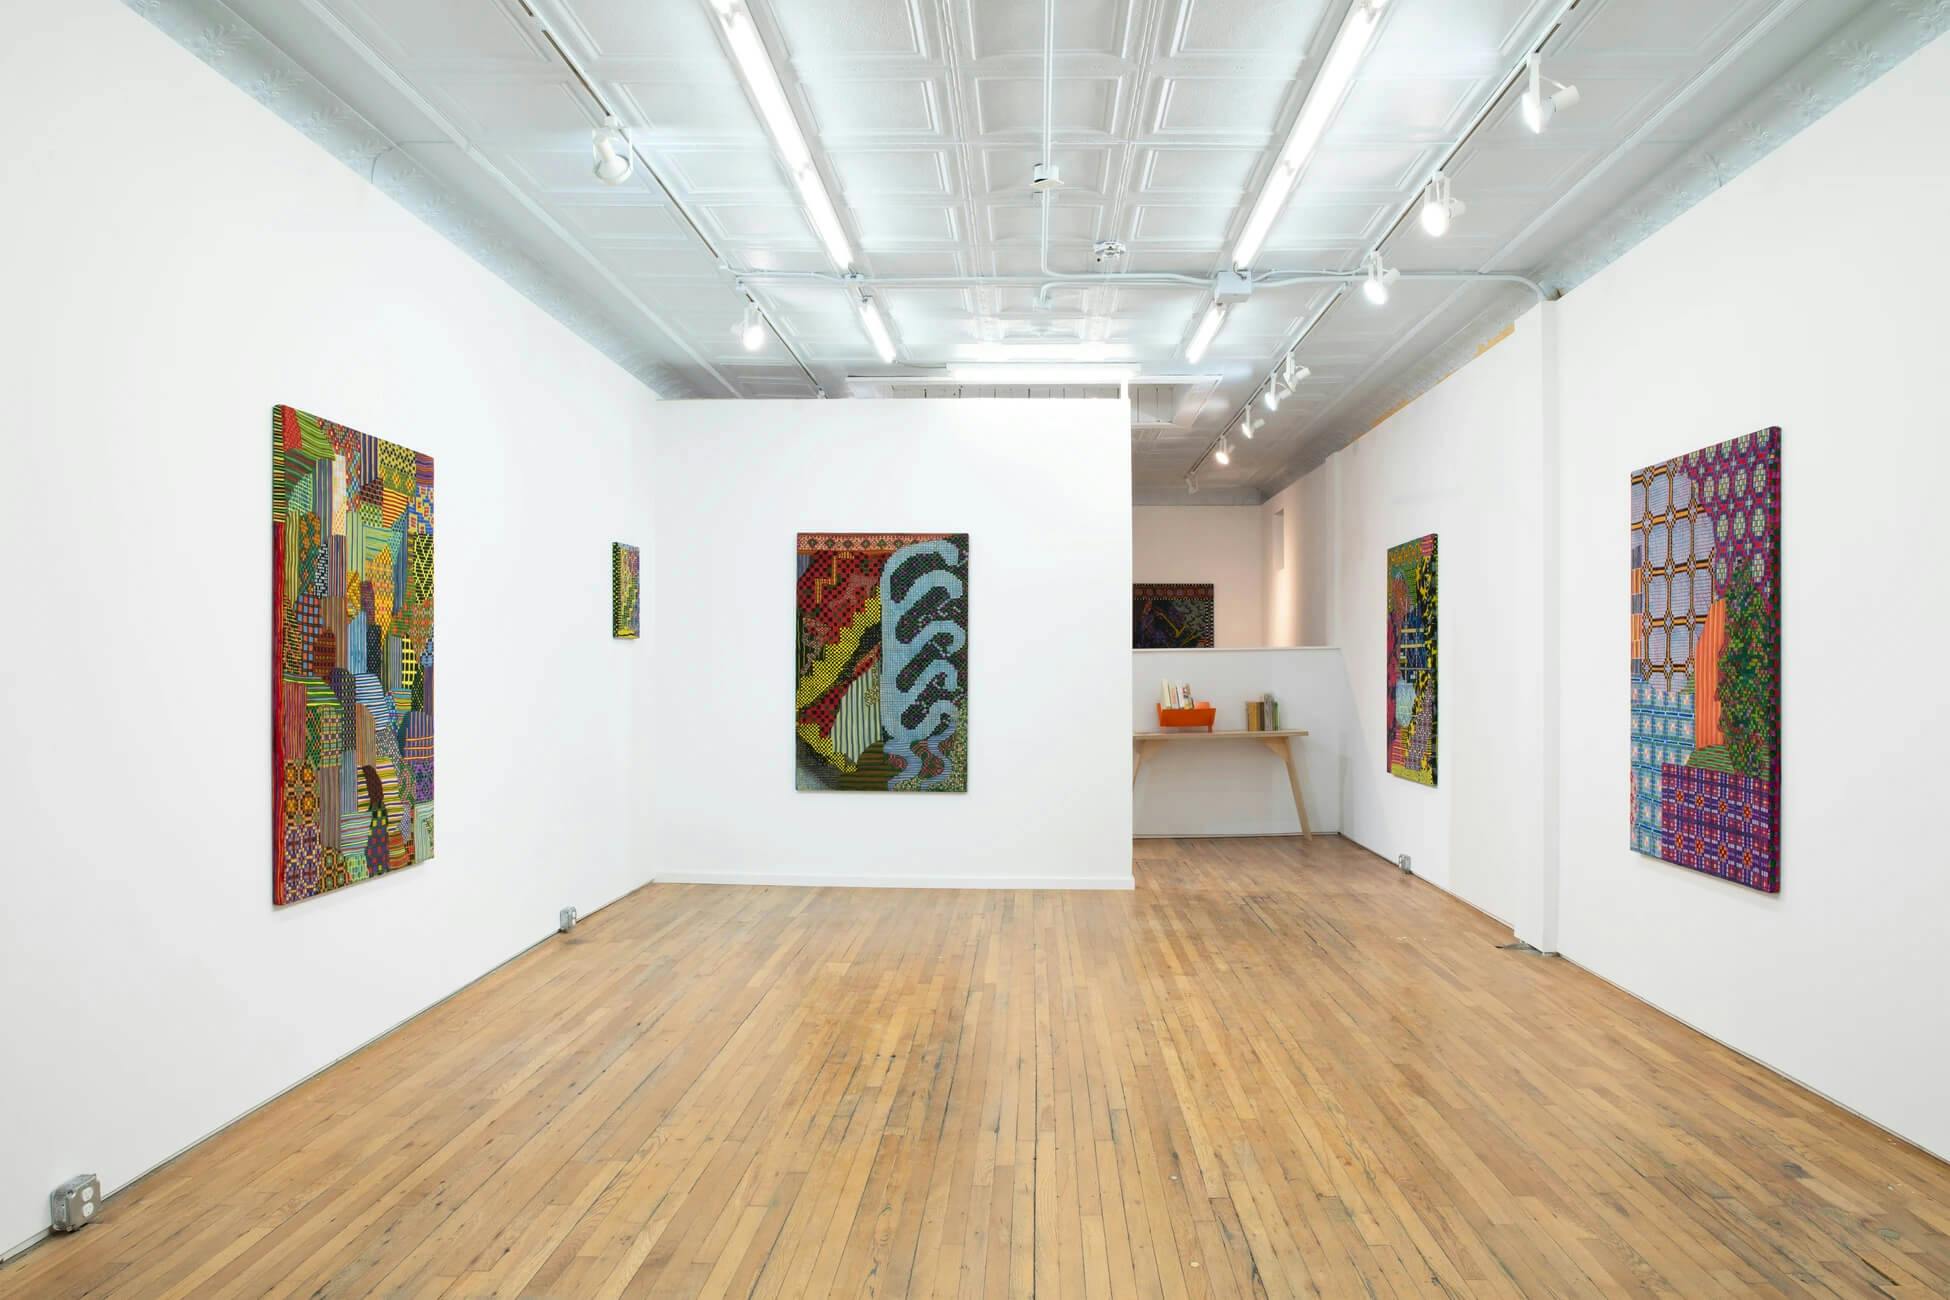 Colorful paintings on silk adorn the wall of the gallery for Lauren Luloff's solo show.